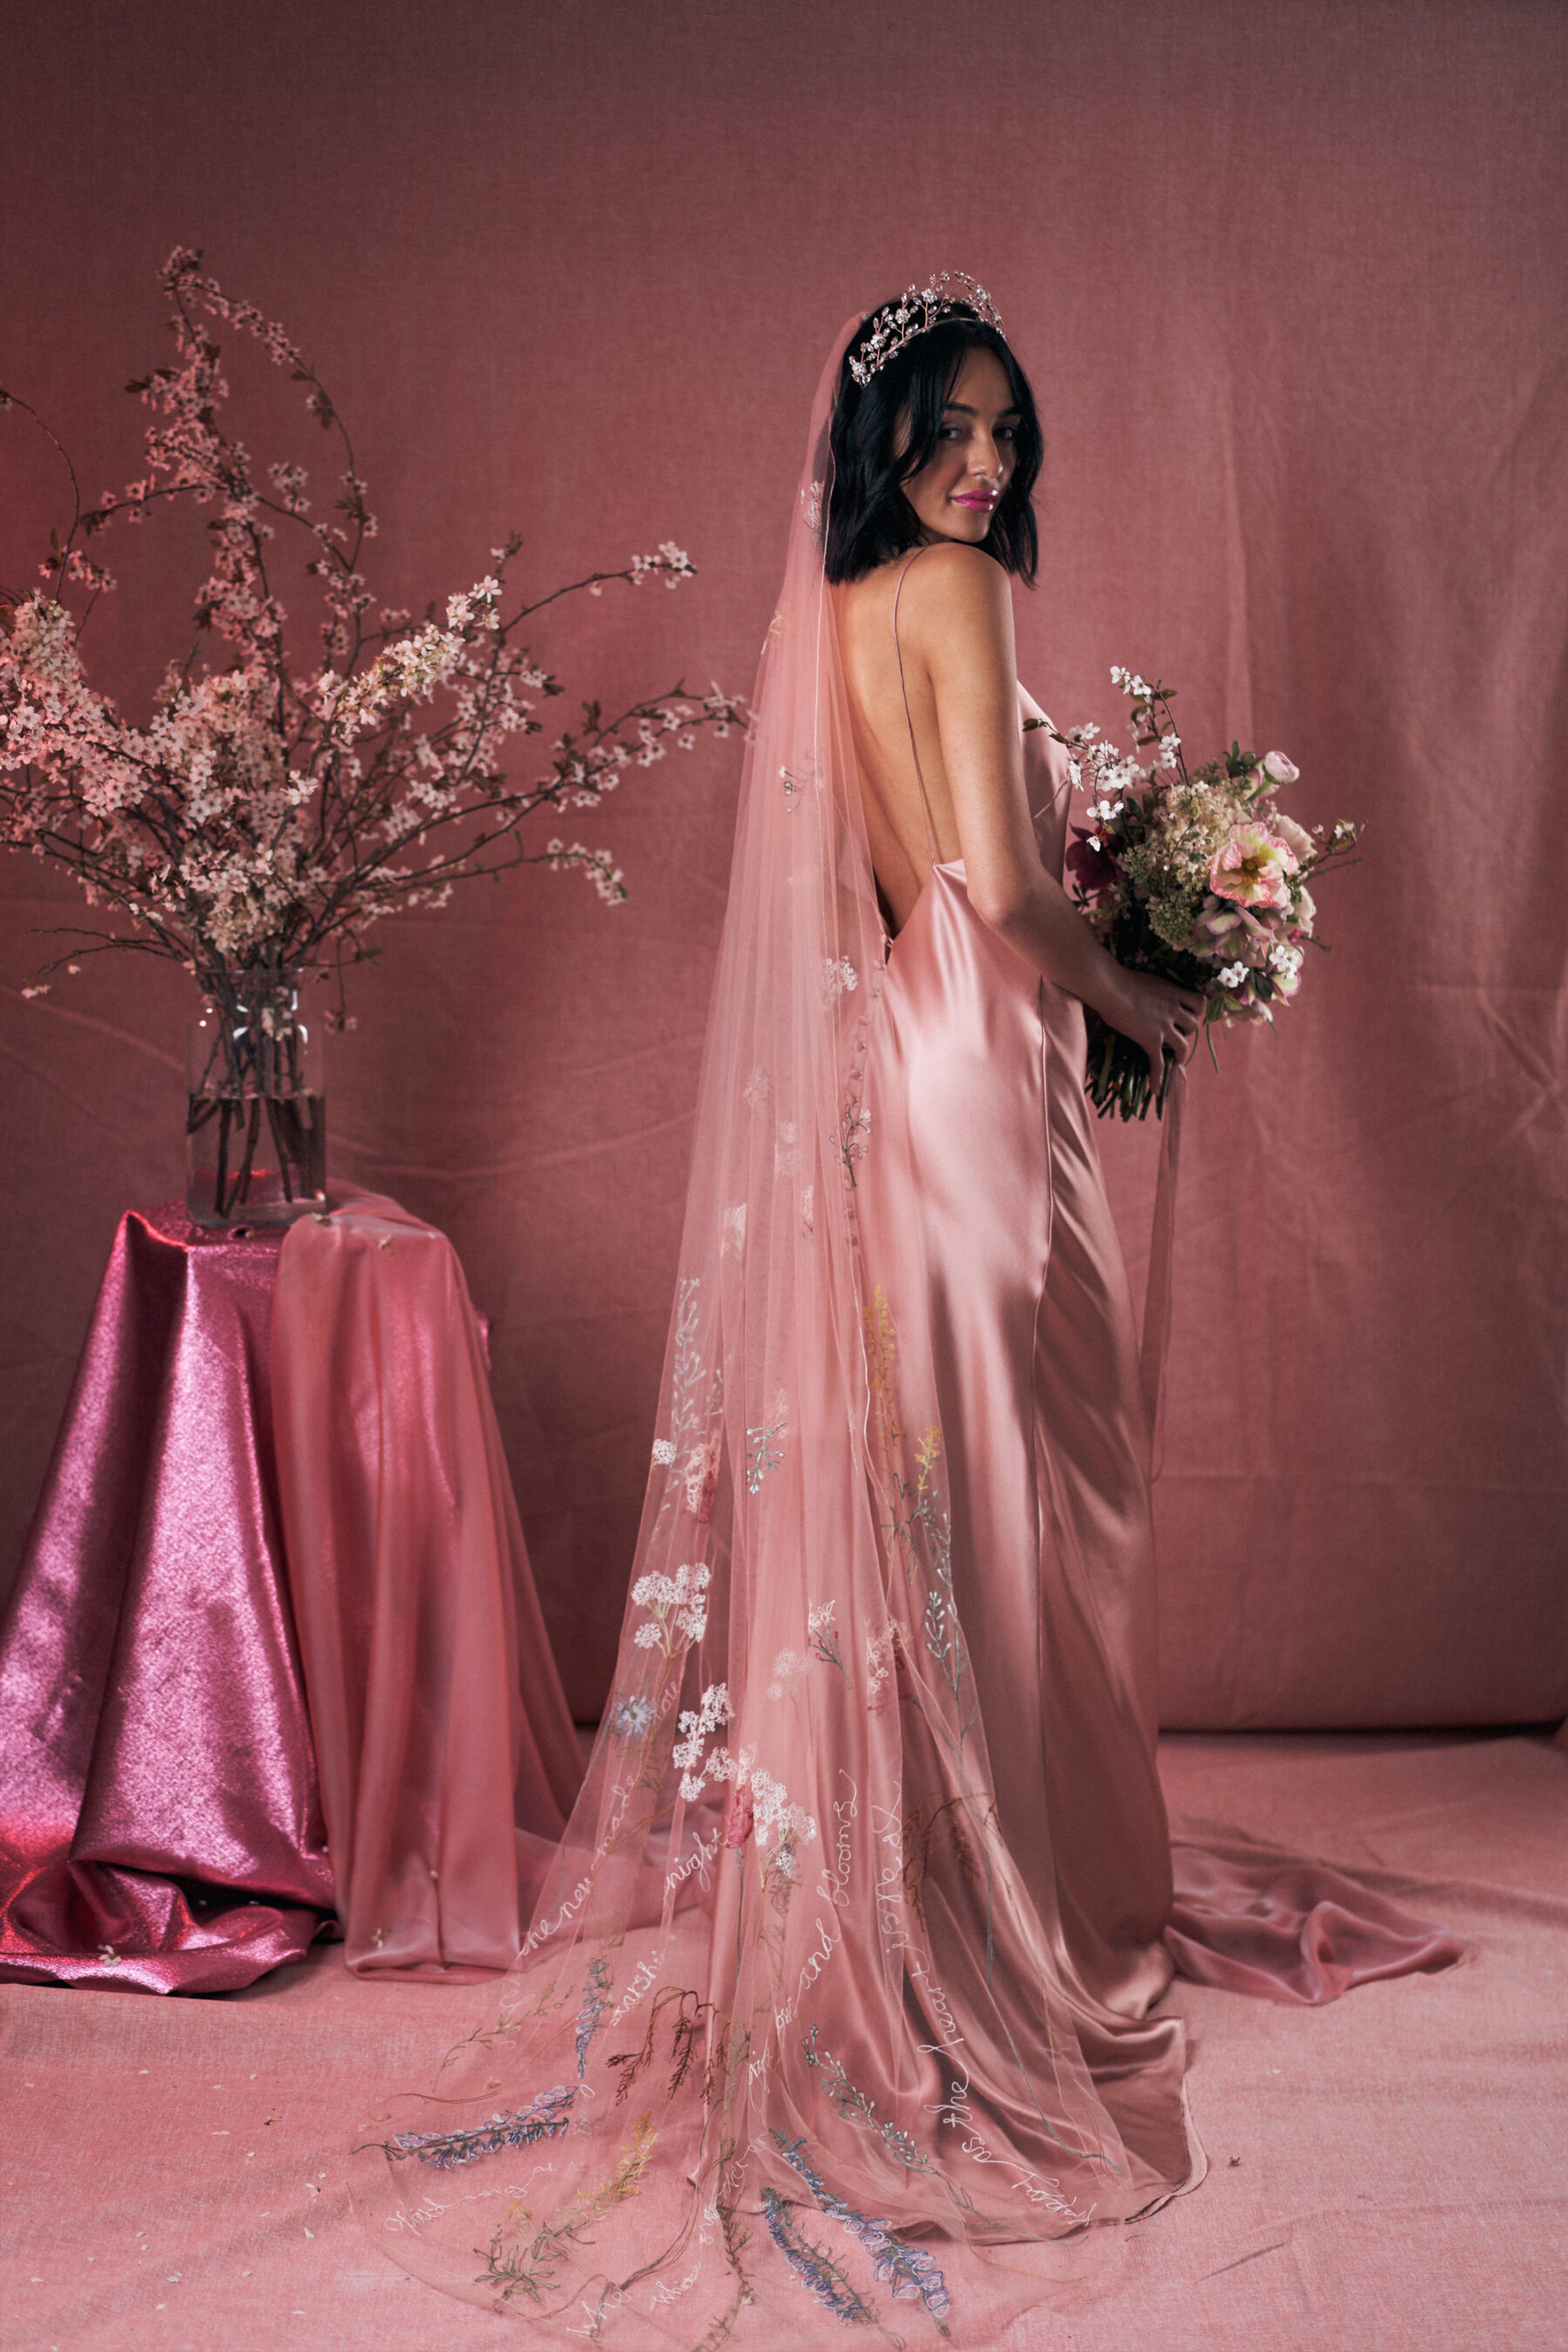 Pink wedding dress by Kate Beaumont. Embroidered pink veil by Daisy Sheldon.